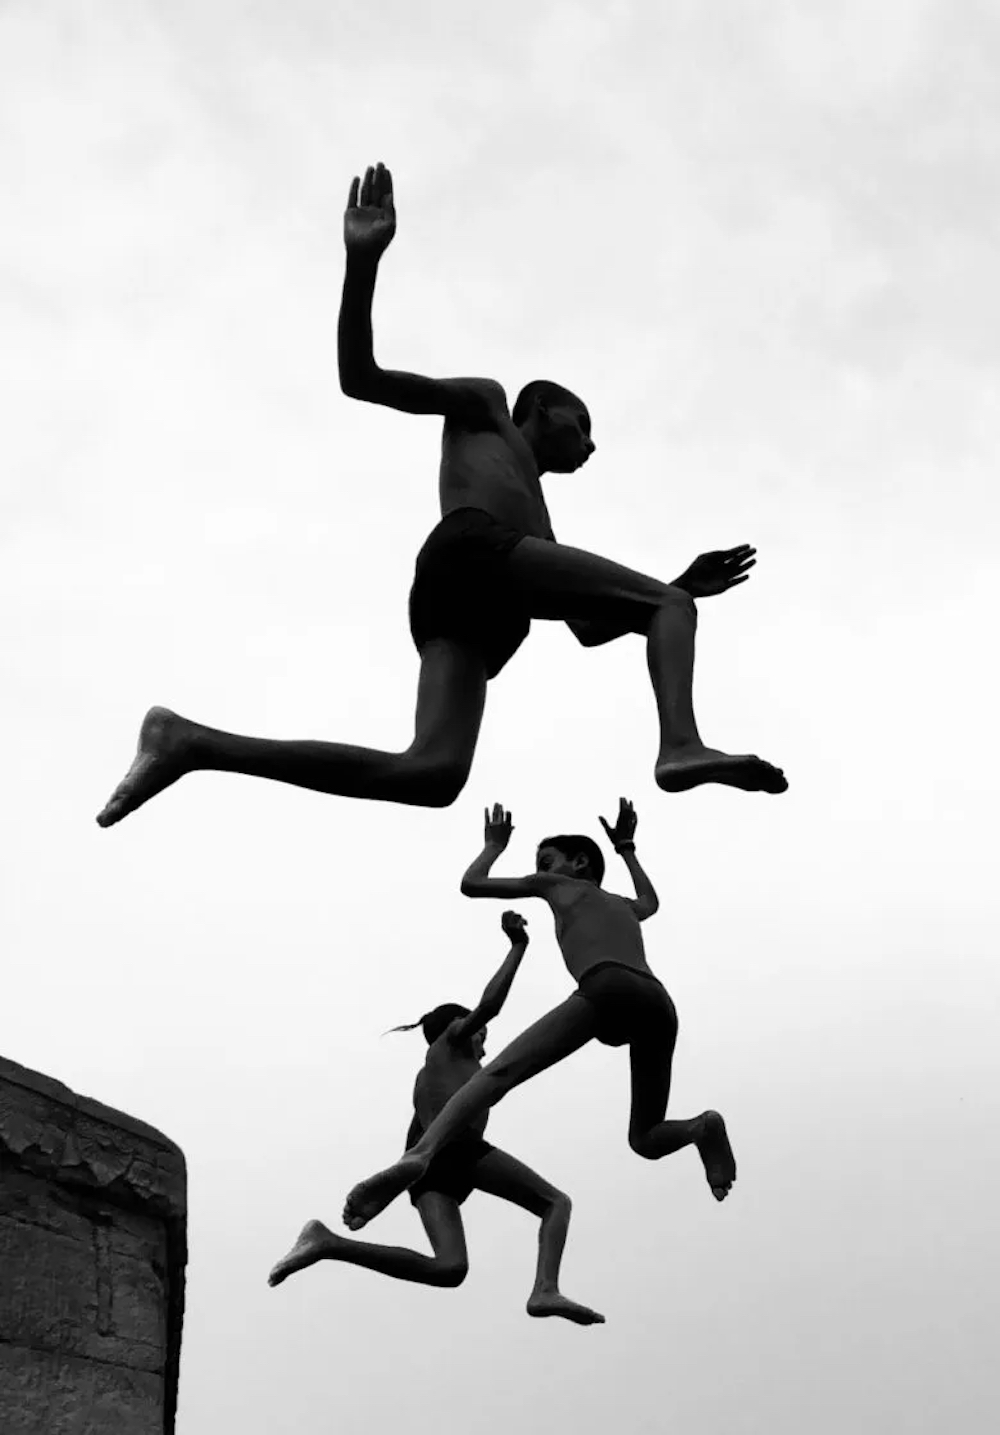 Flying Boys by Dimpy Bhalotia won the iPhone Photography Awards in 2020. © Dimpy Bhalotia 2022